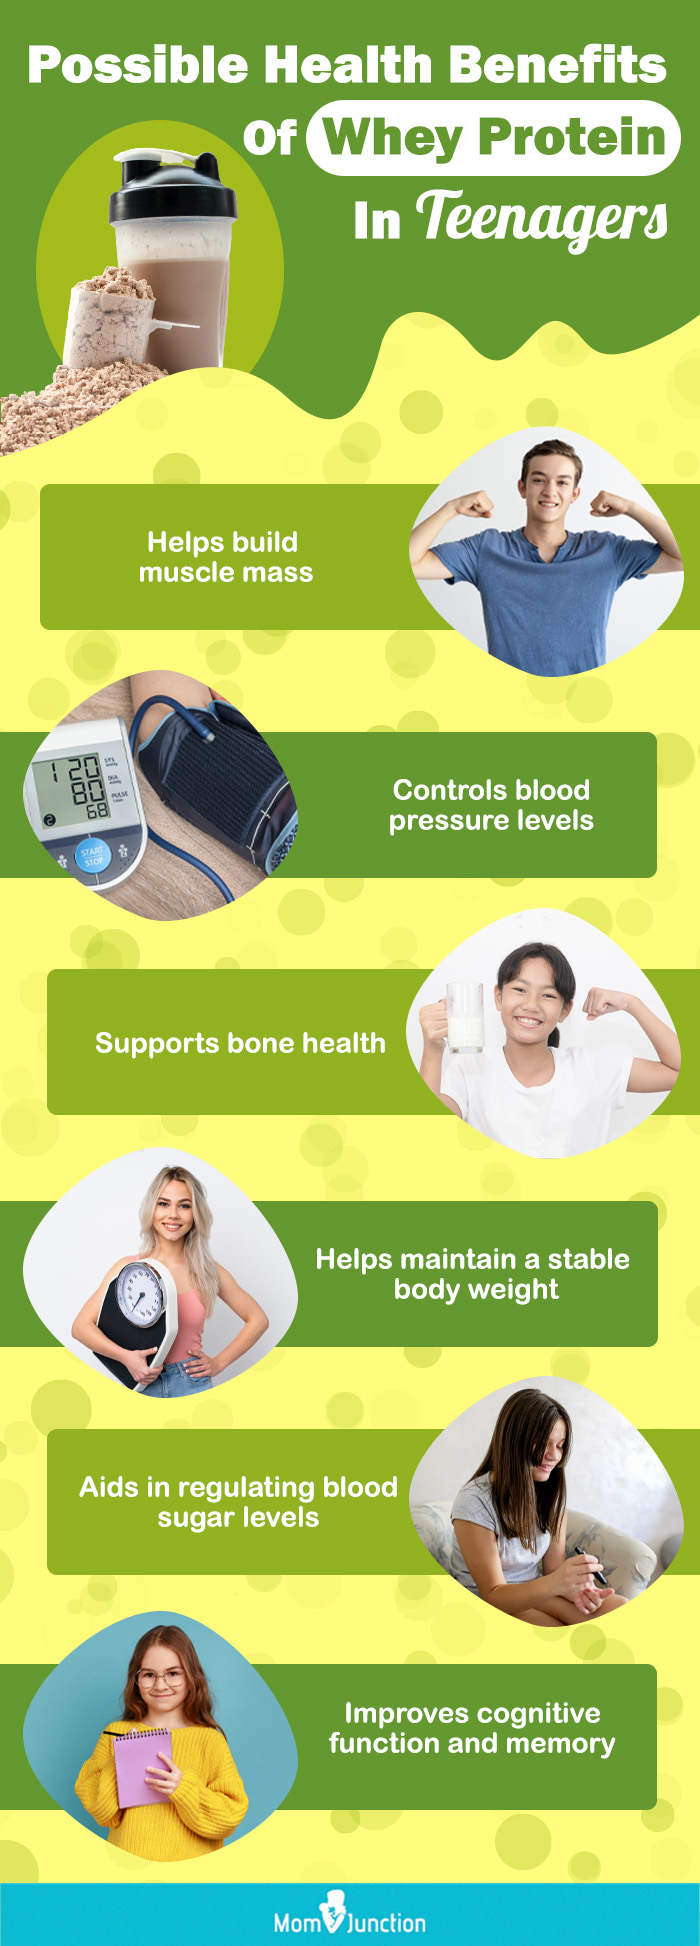 possible health benefits of whey protein in teenagers (infographic)